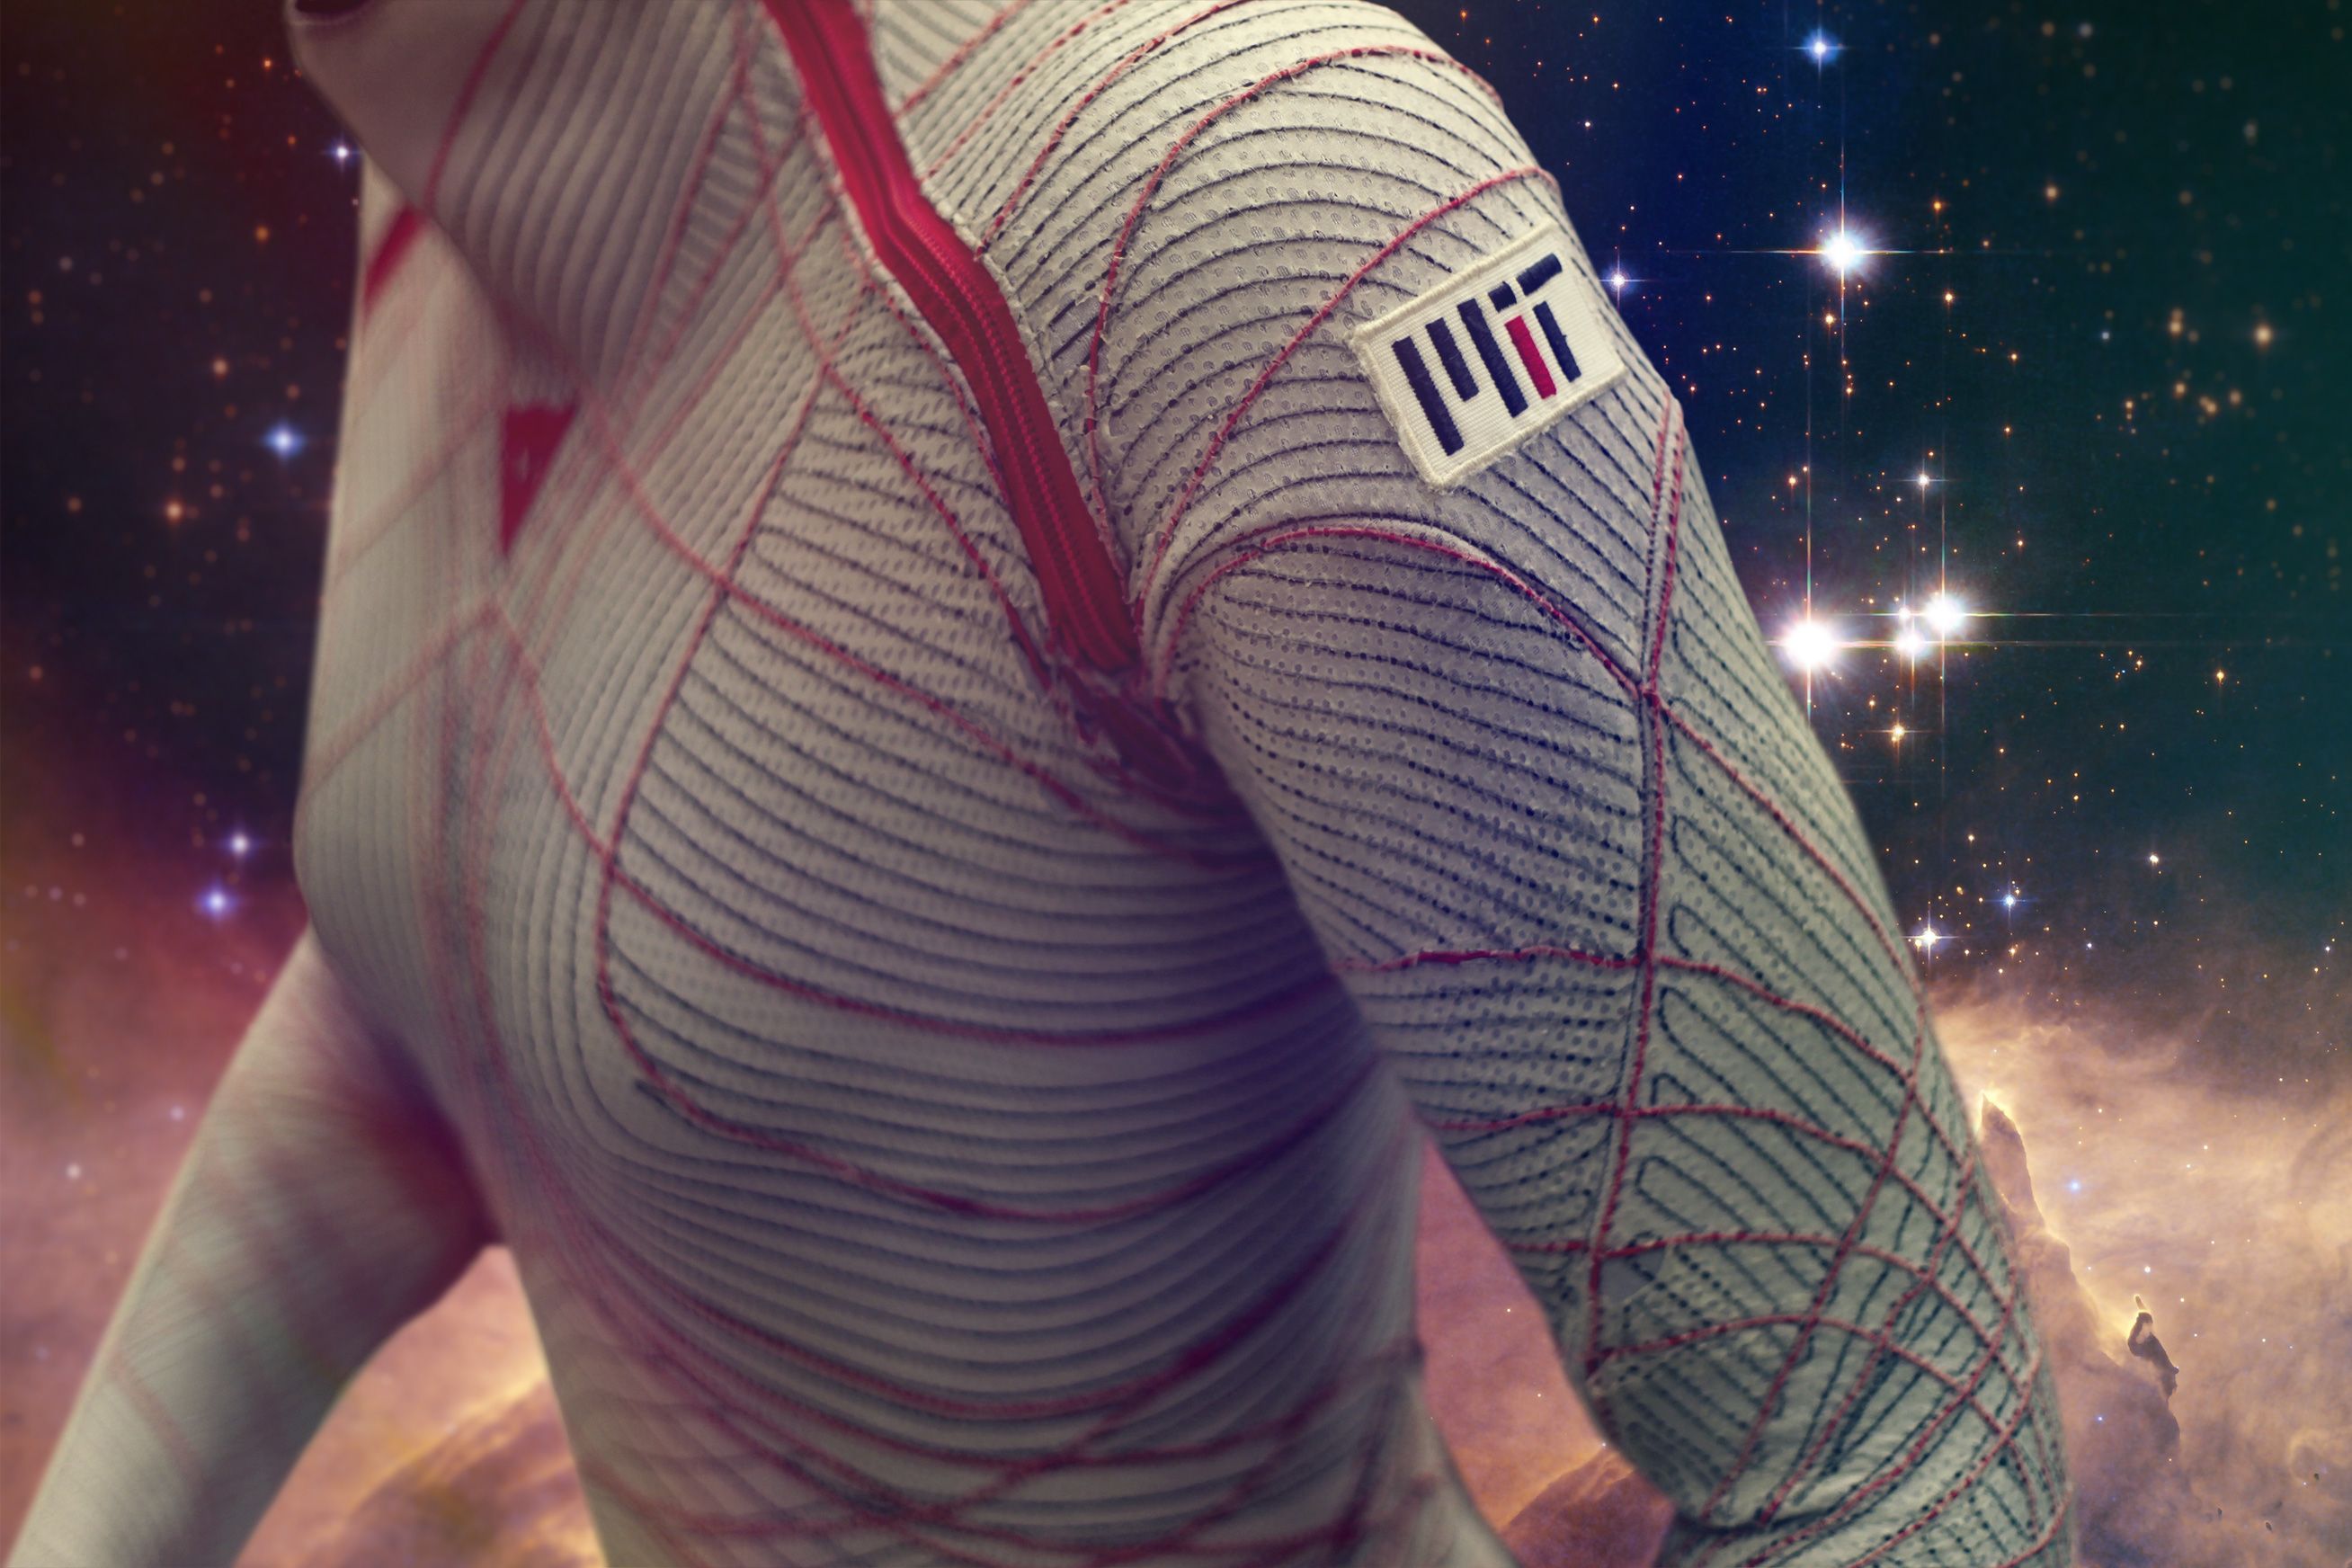 Shrink-wrapping spacesuits | MIT News | Massachusetts Institute of